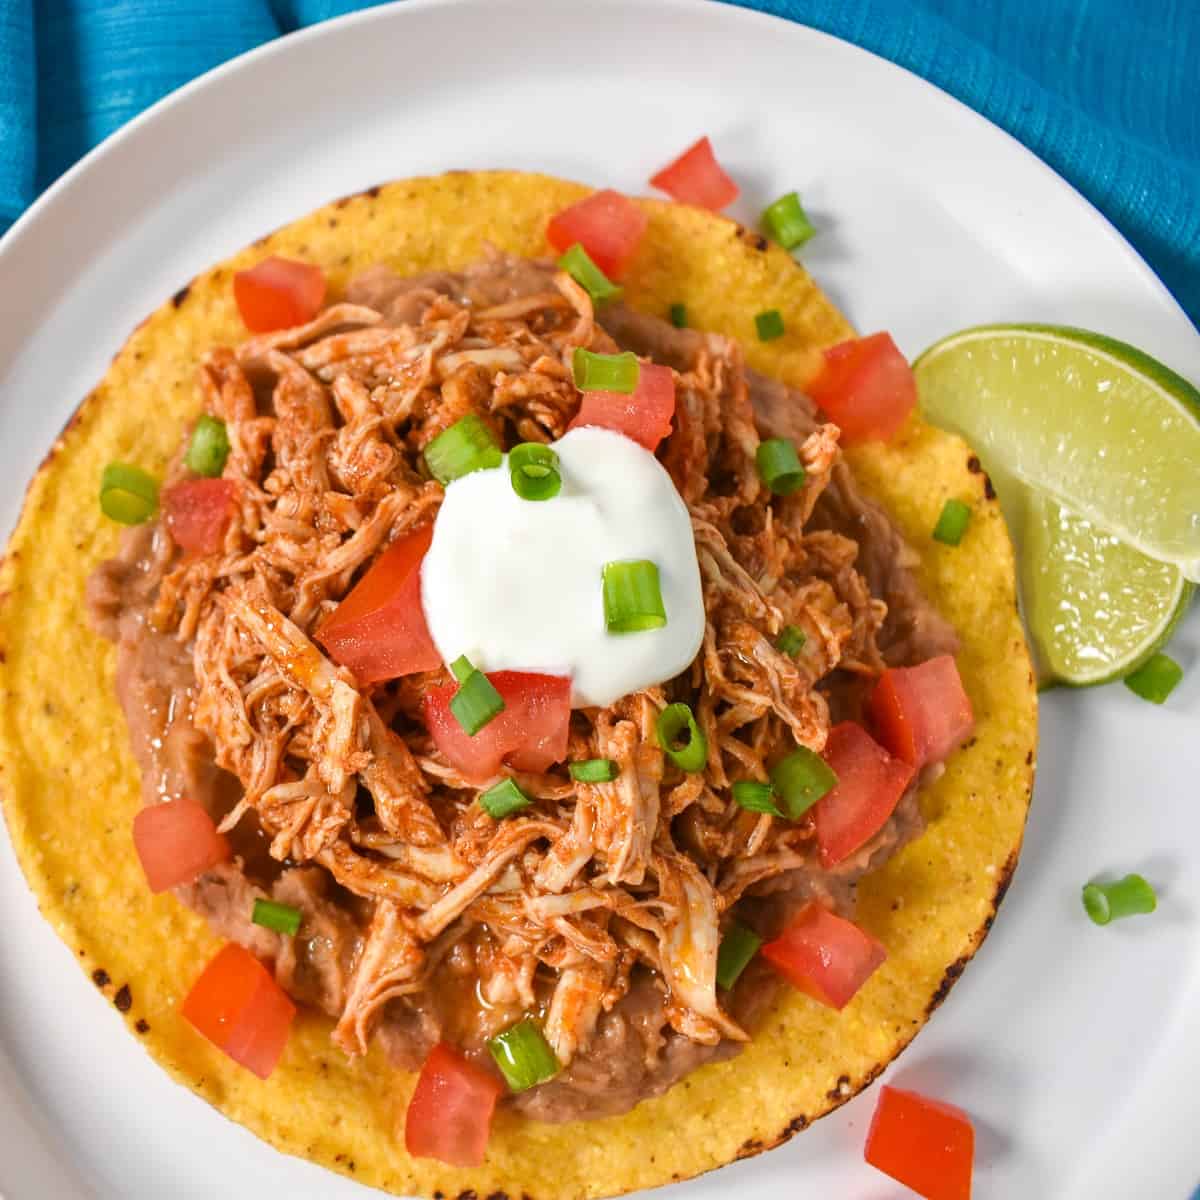 An image of the shredded chicken tostada on a white plate and garnished with diced tomatoes, sour cream and sliced green onions with two lime wedges on the side.